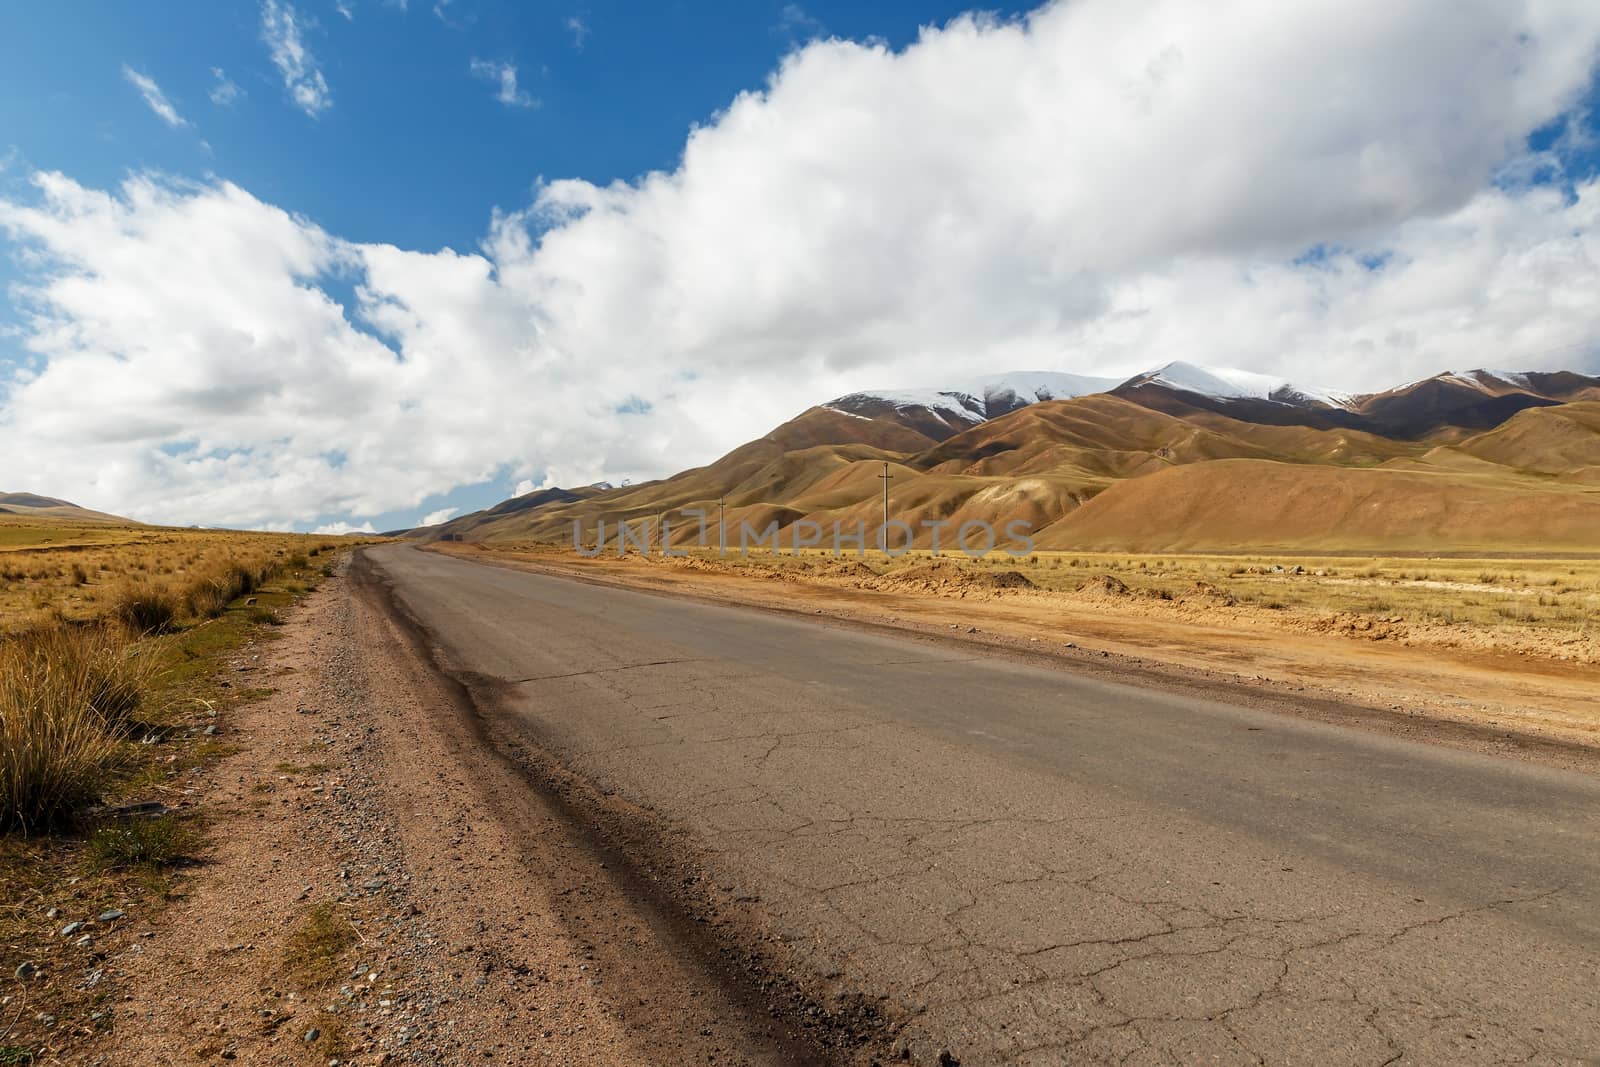 A367 highway passing in the Naryn region, Kyrgyzstan by Mieszko9